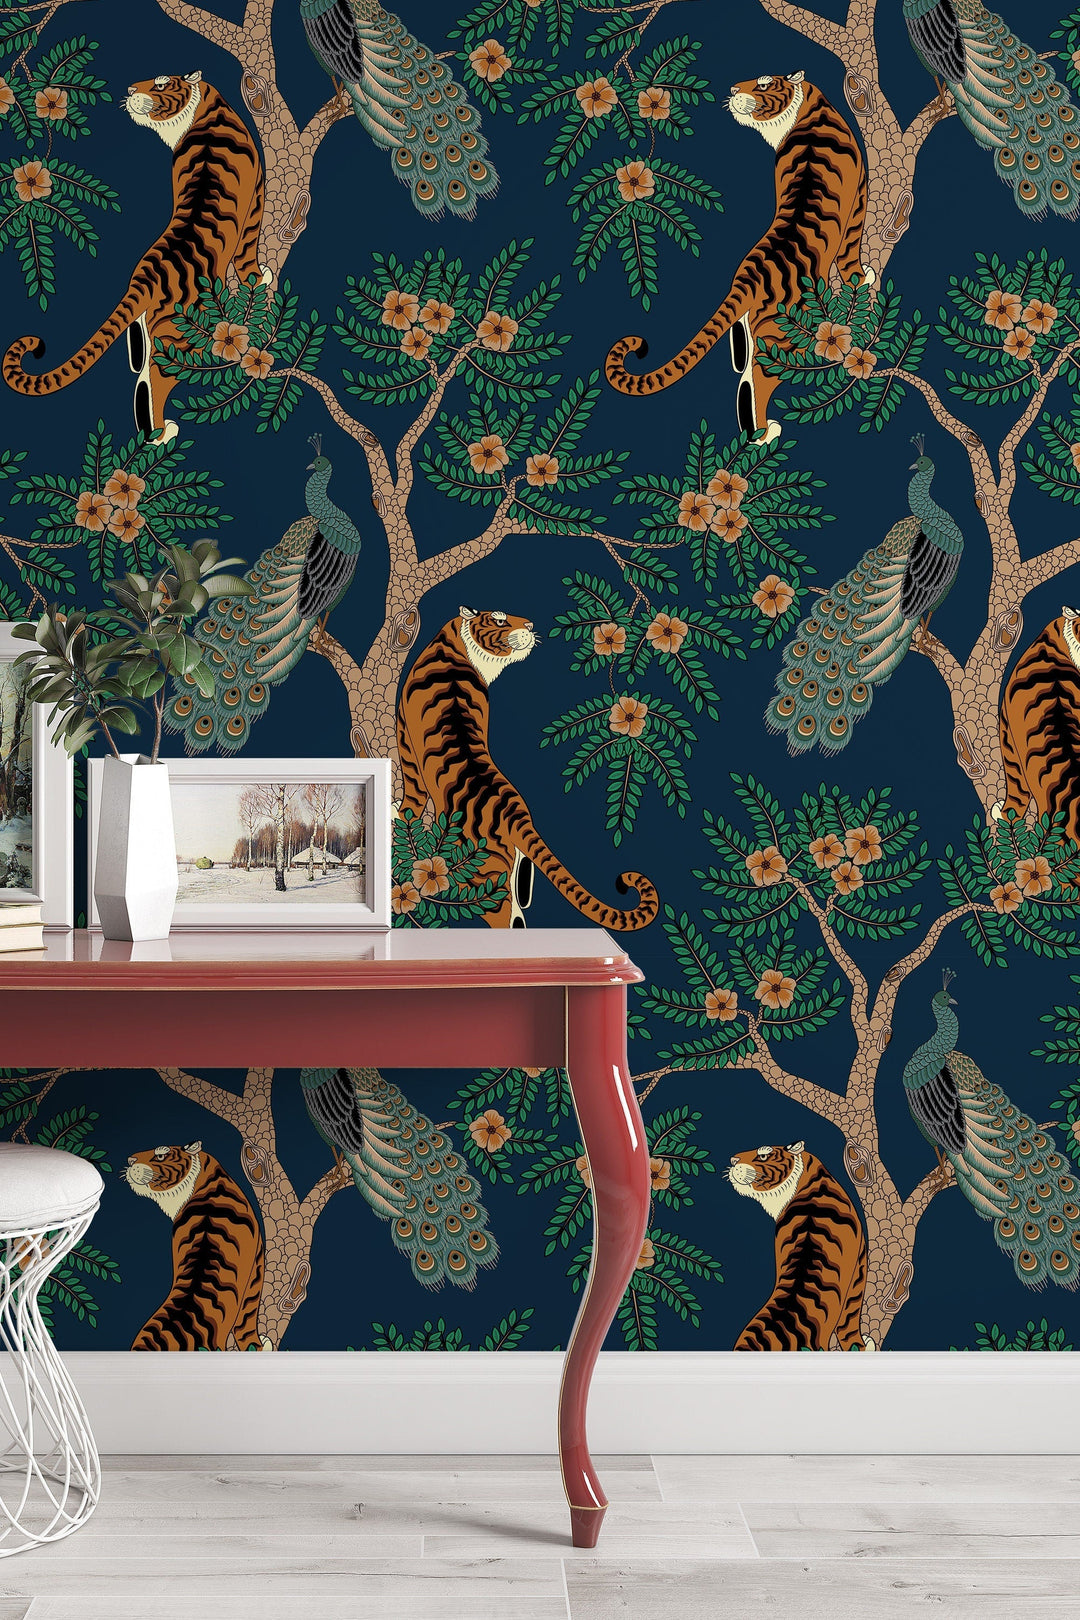 Tiger and Peacock Peel and Stick Wallpaper- Traditional wallpaper 3146